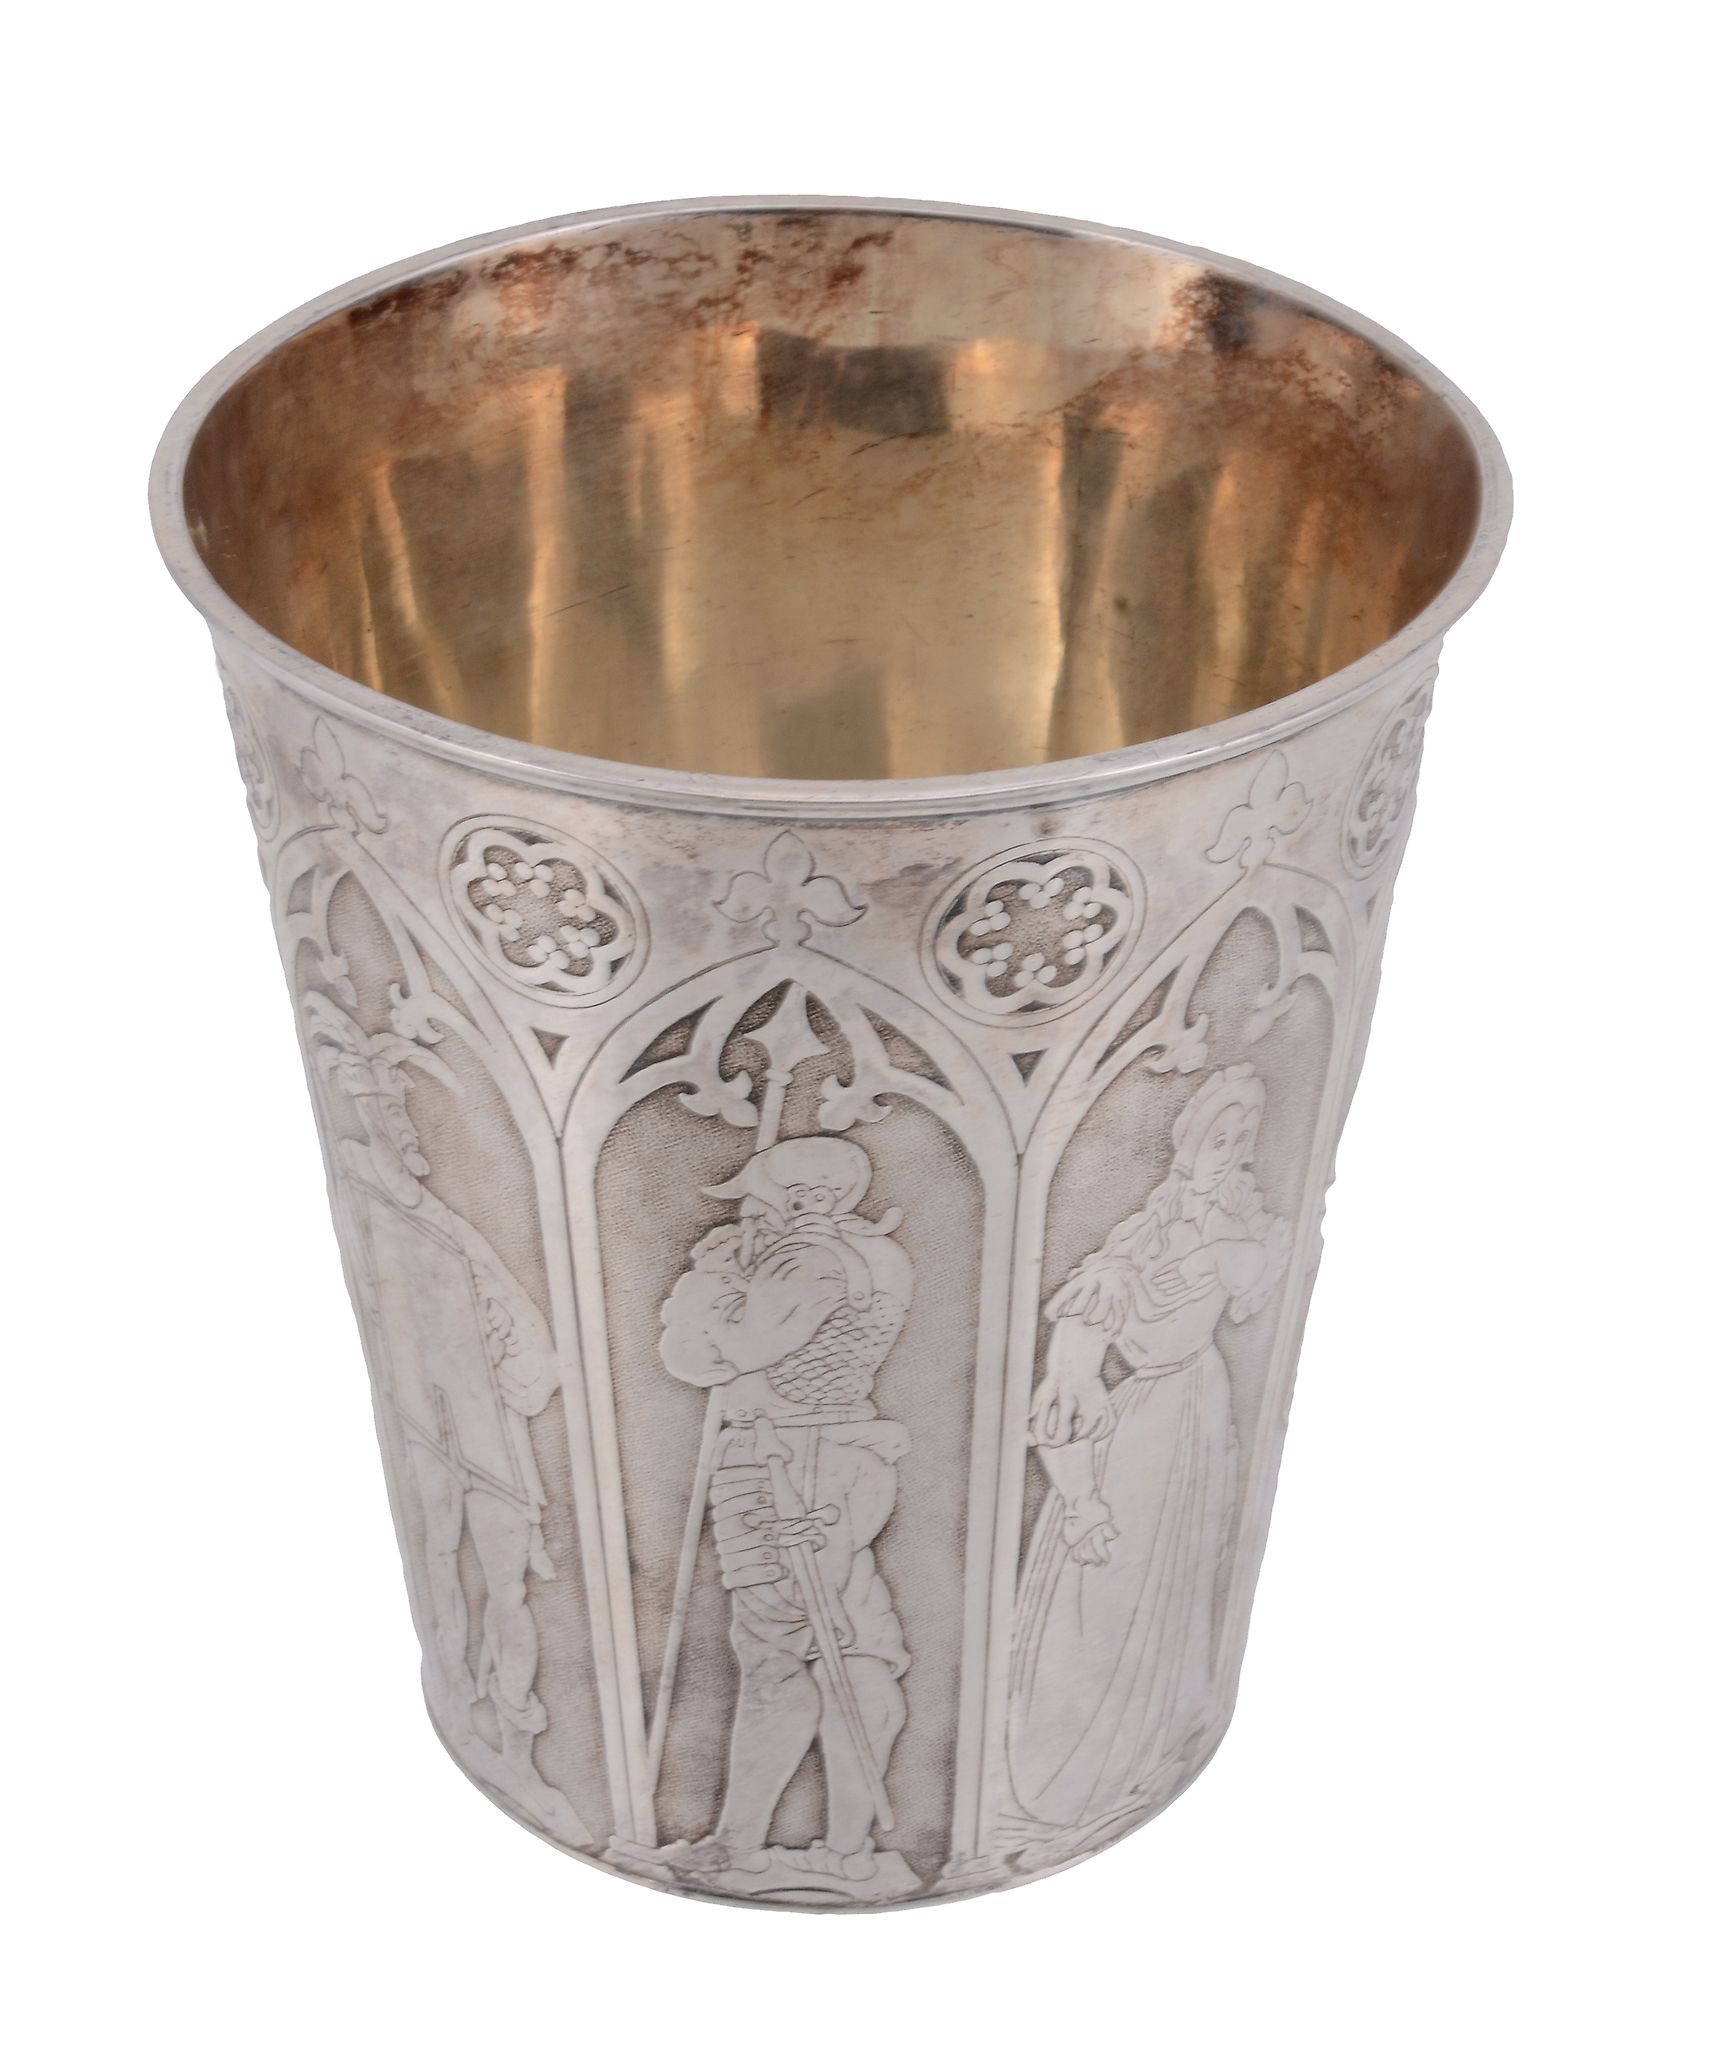 An unusual Belgian silver beaker by Wolfers Freres,   Brussels, 1831-1868 large article mark, .800